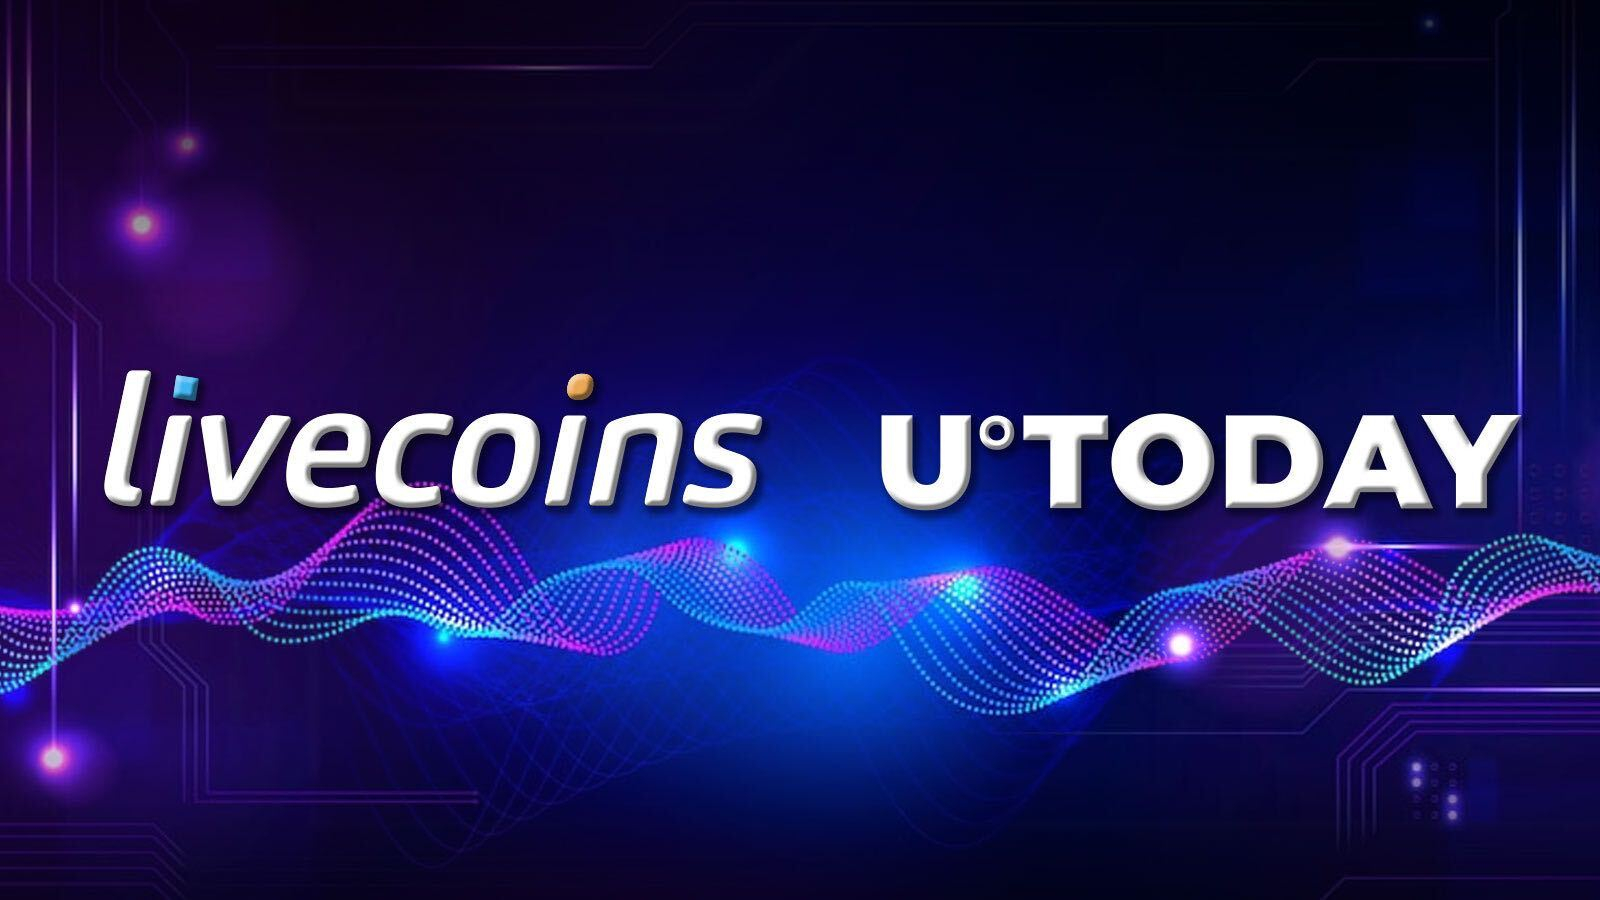 U.Today Now Partners with the Largest Brazilian Crypto Site Livecoins: Details